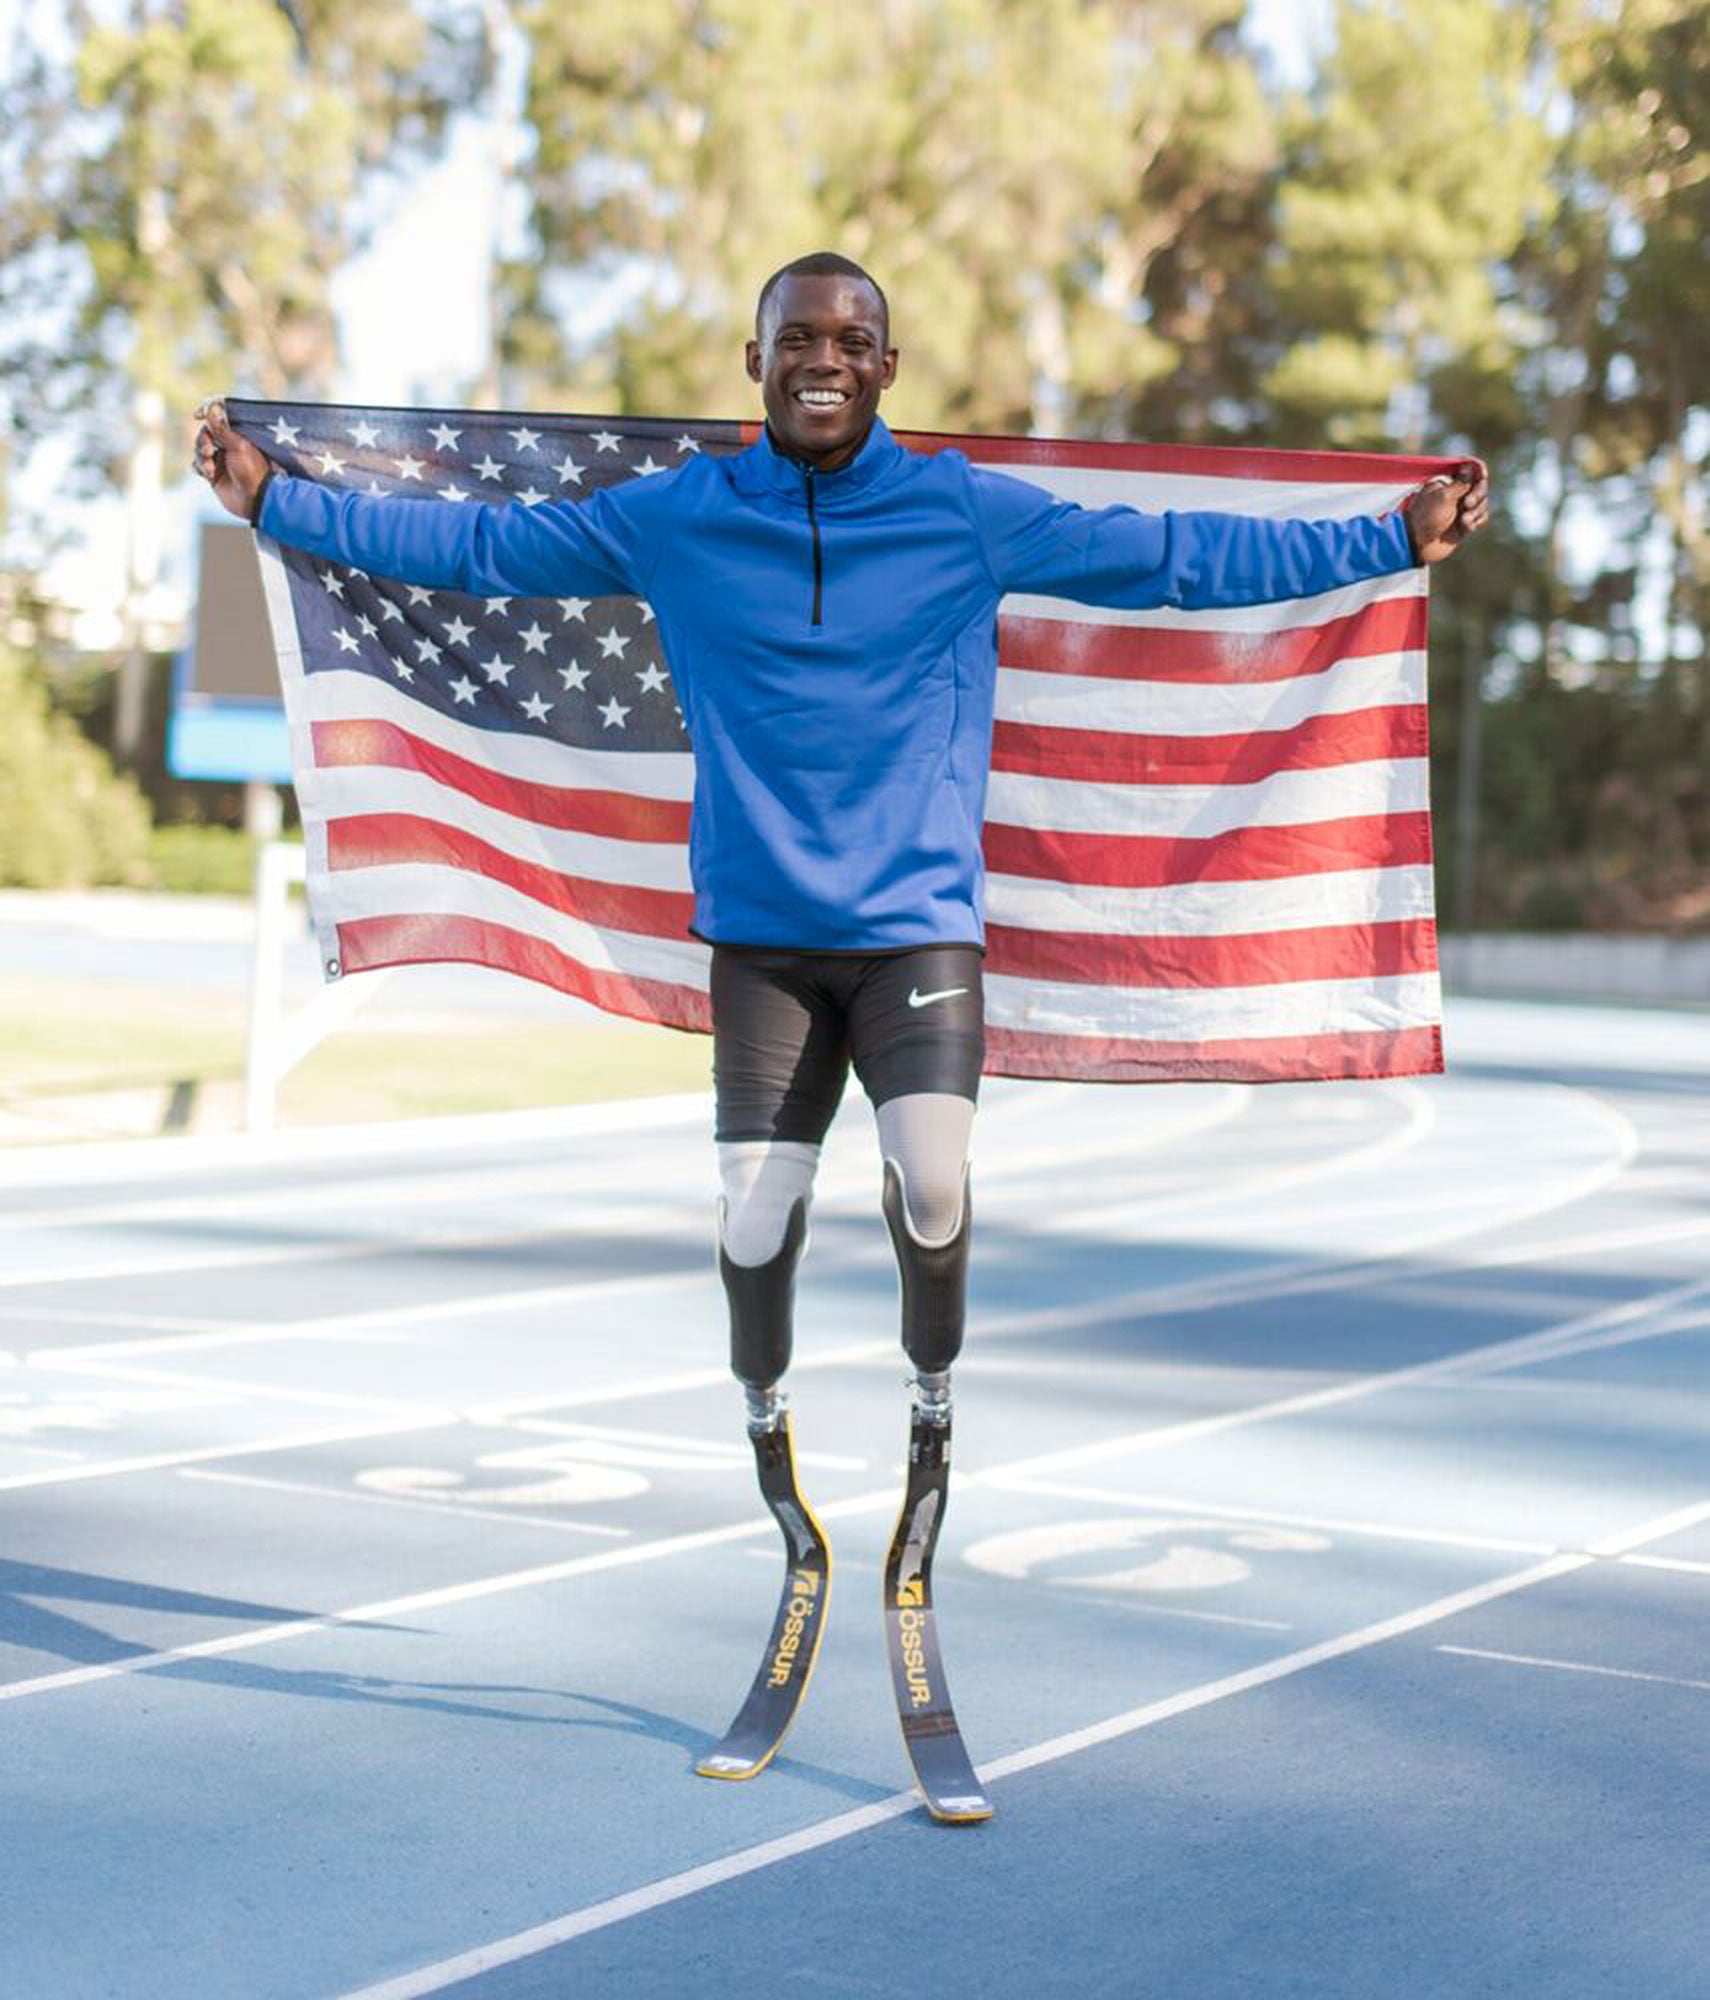 Double Amputee Blake Leeper Makes History At The U.S. Track And Field Championships